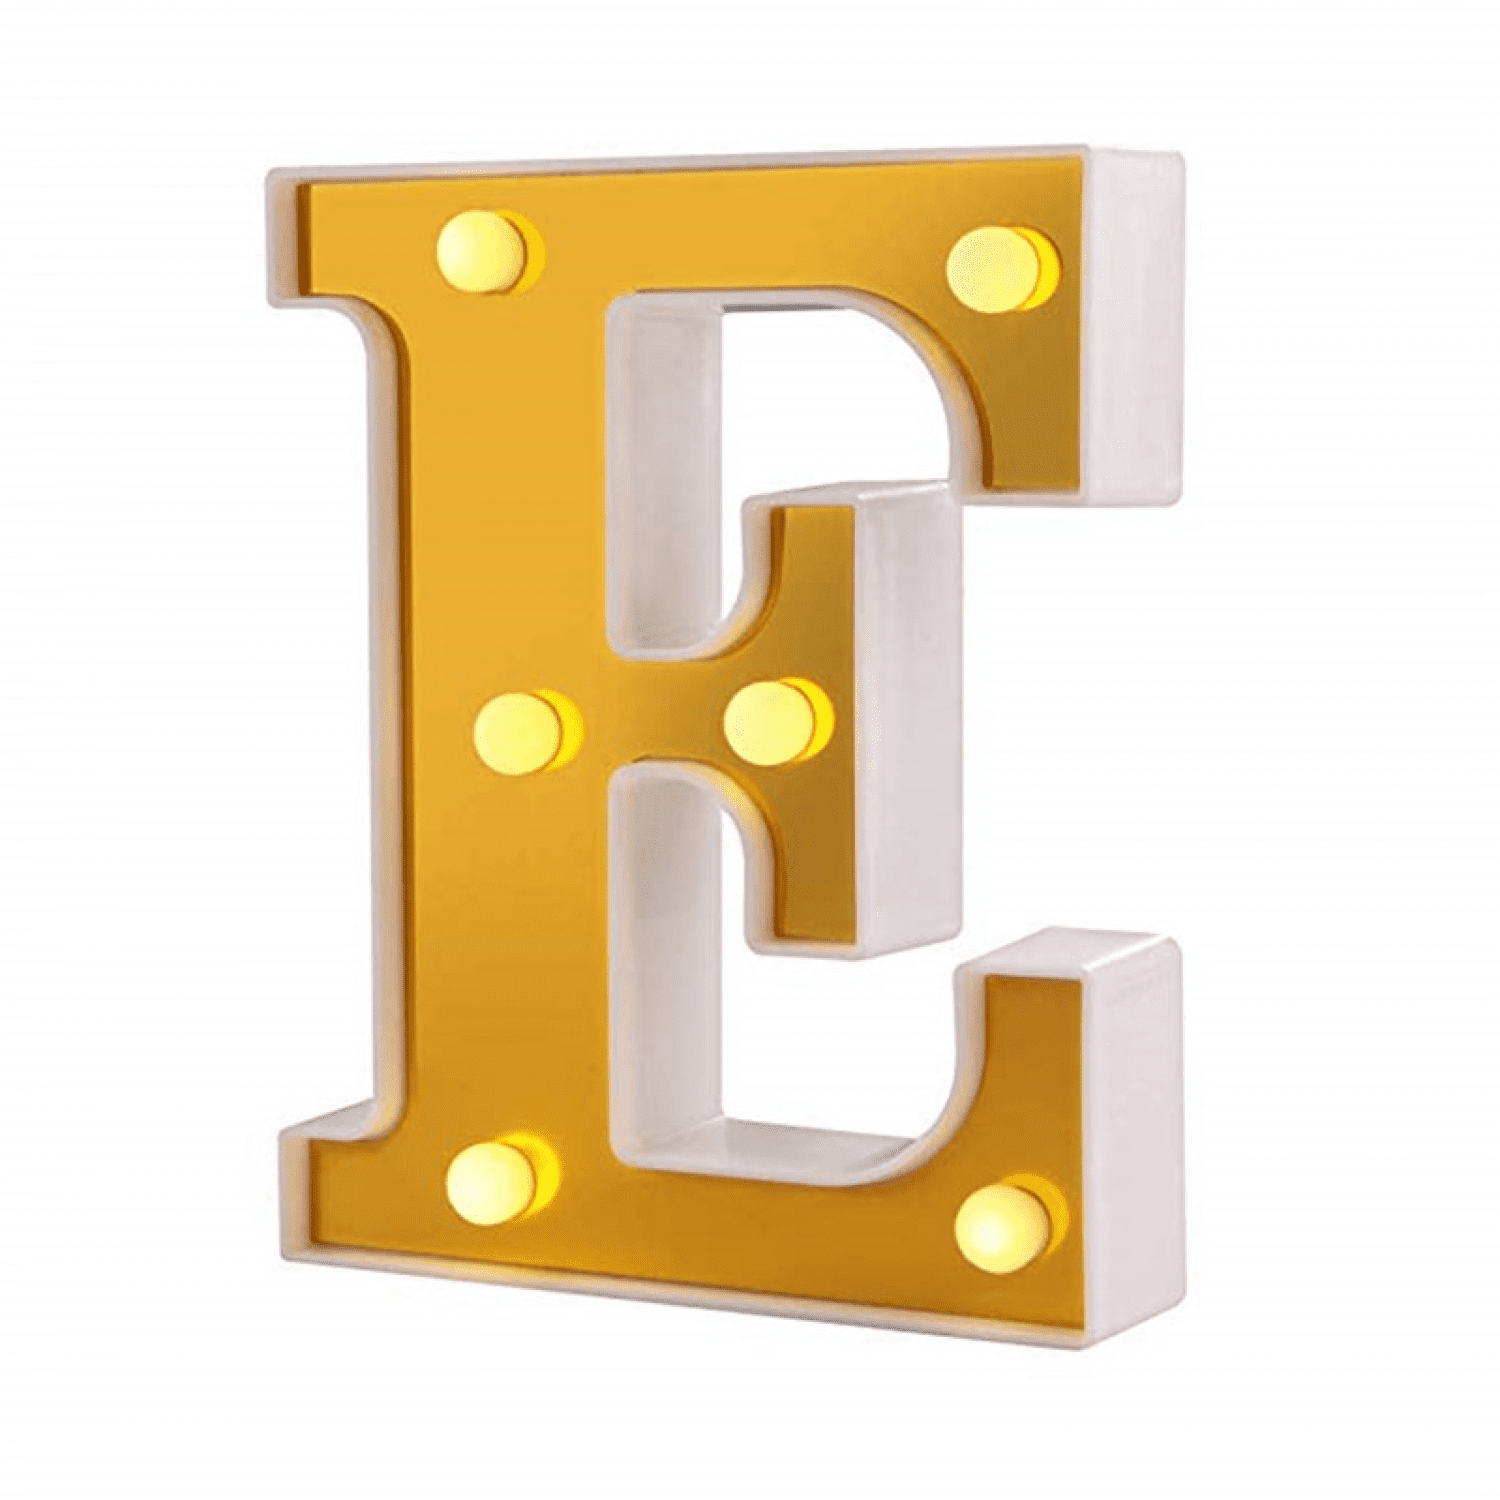 Retro Box Letter Signage With Light Bulb, Custom Marquee Signs, Business  Illuminated Signs, LED Channel Letter, Rustic Metal Letter Lights 